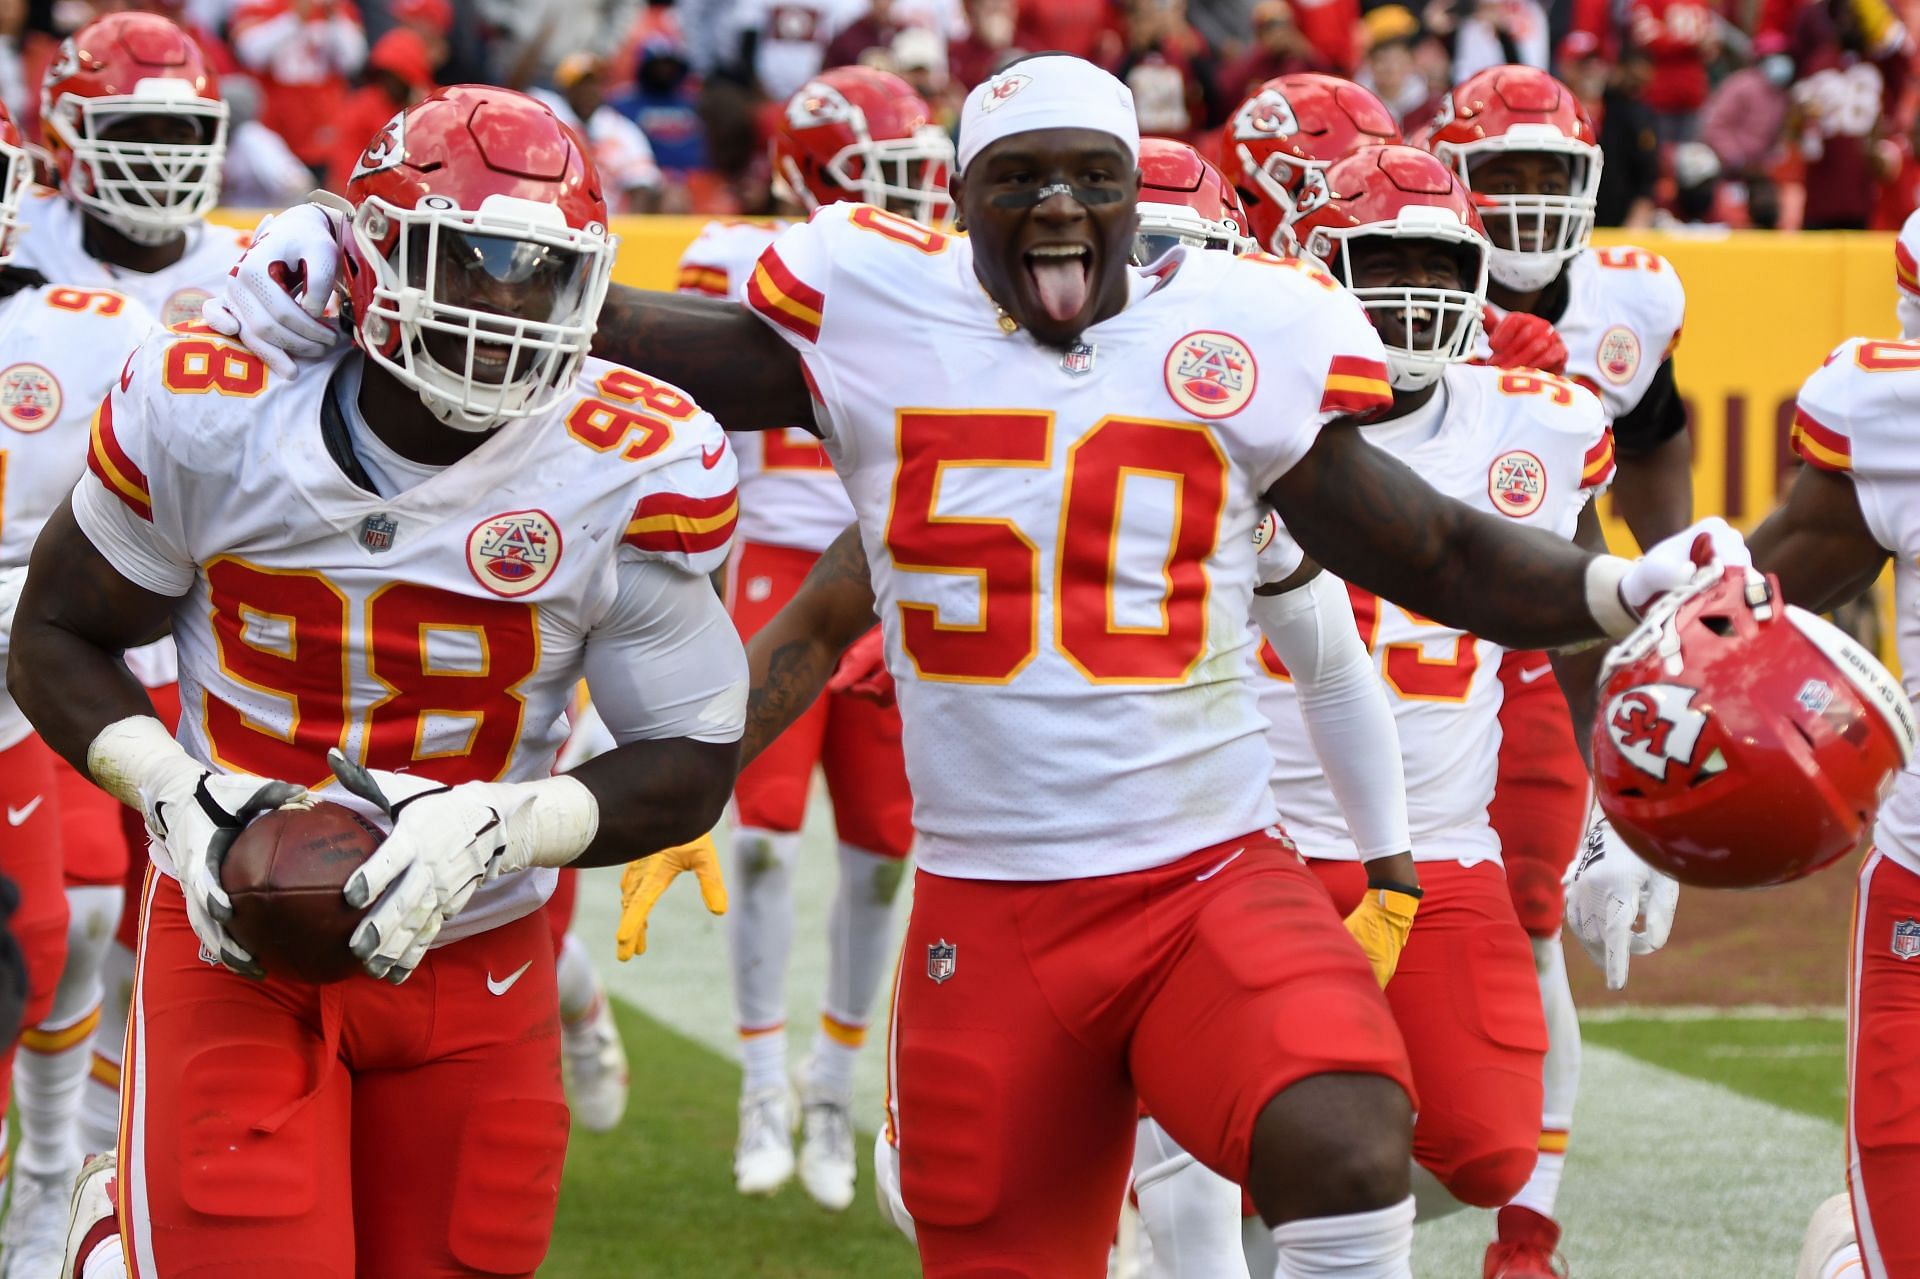 Kansas City Chiefs will take on New York Giants in Week 8